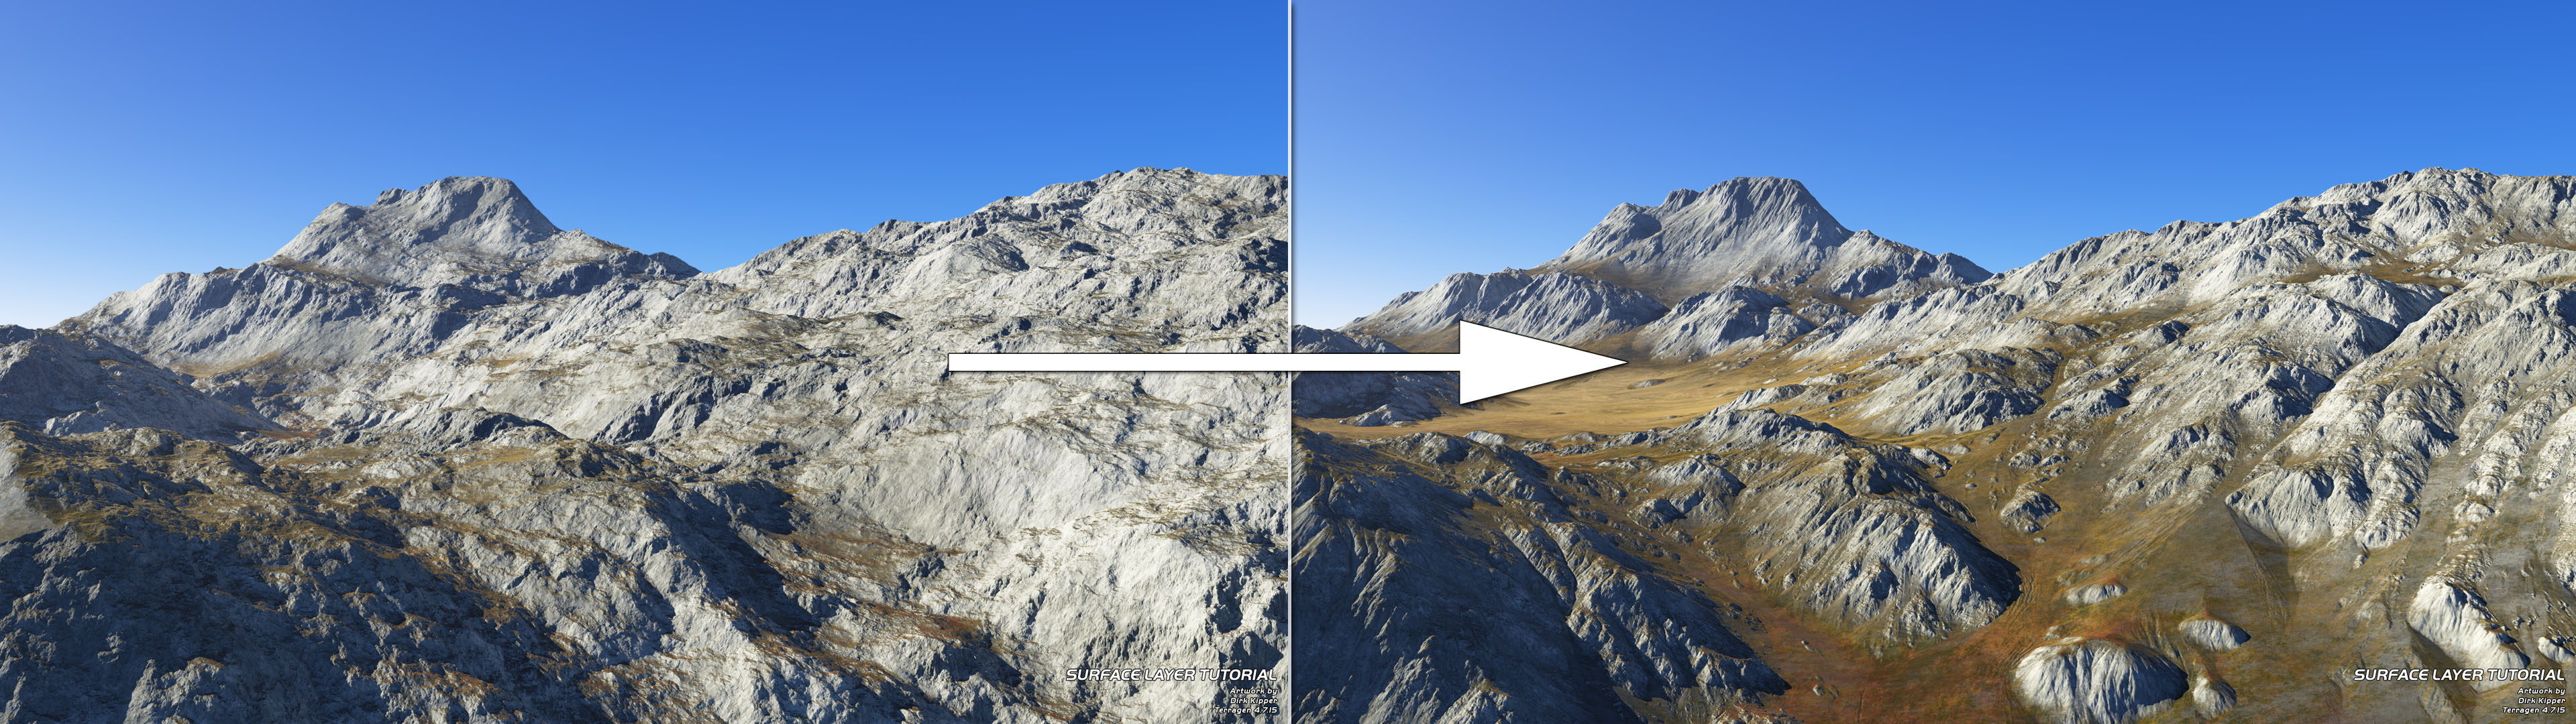 Surface Layer Tutorial and Classic Erosion.jpg